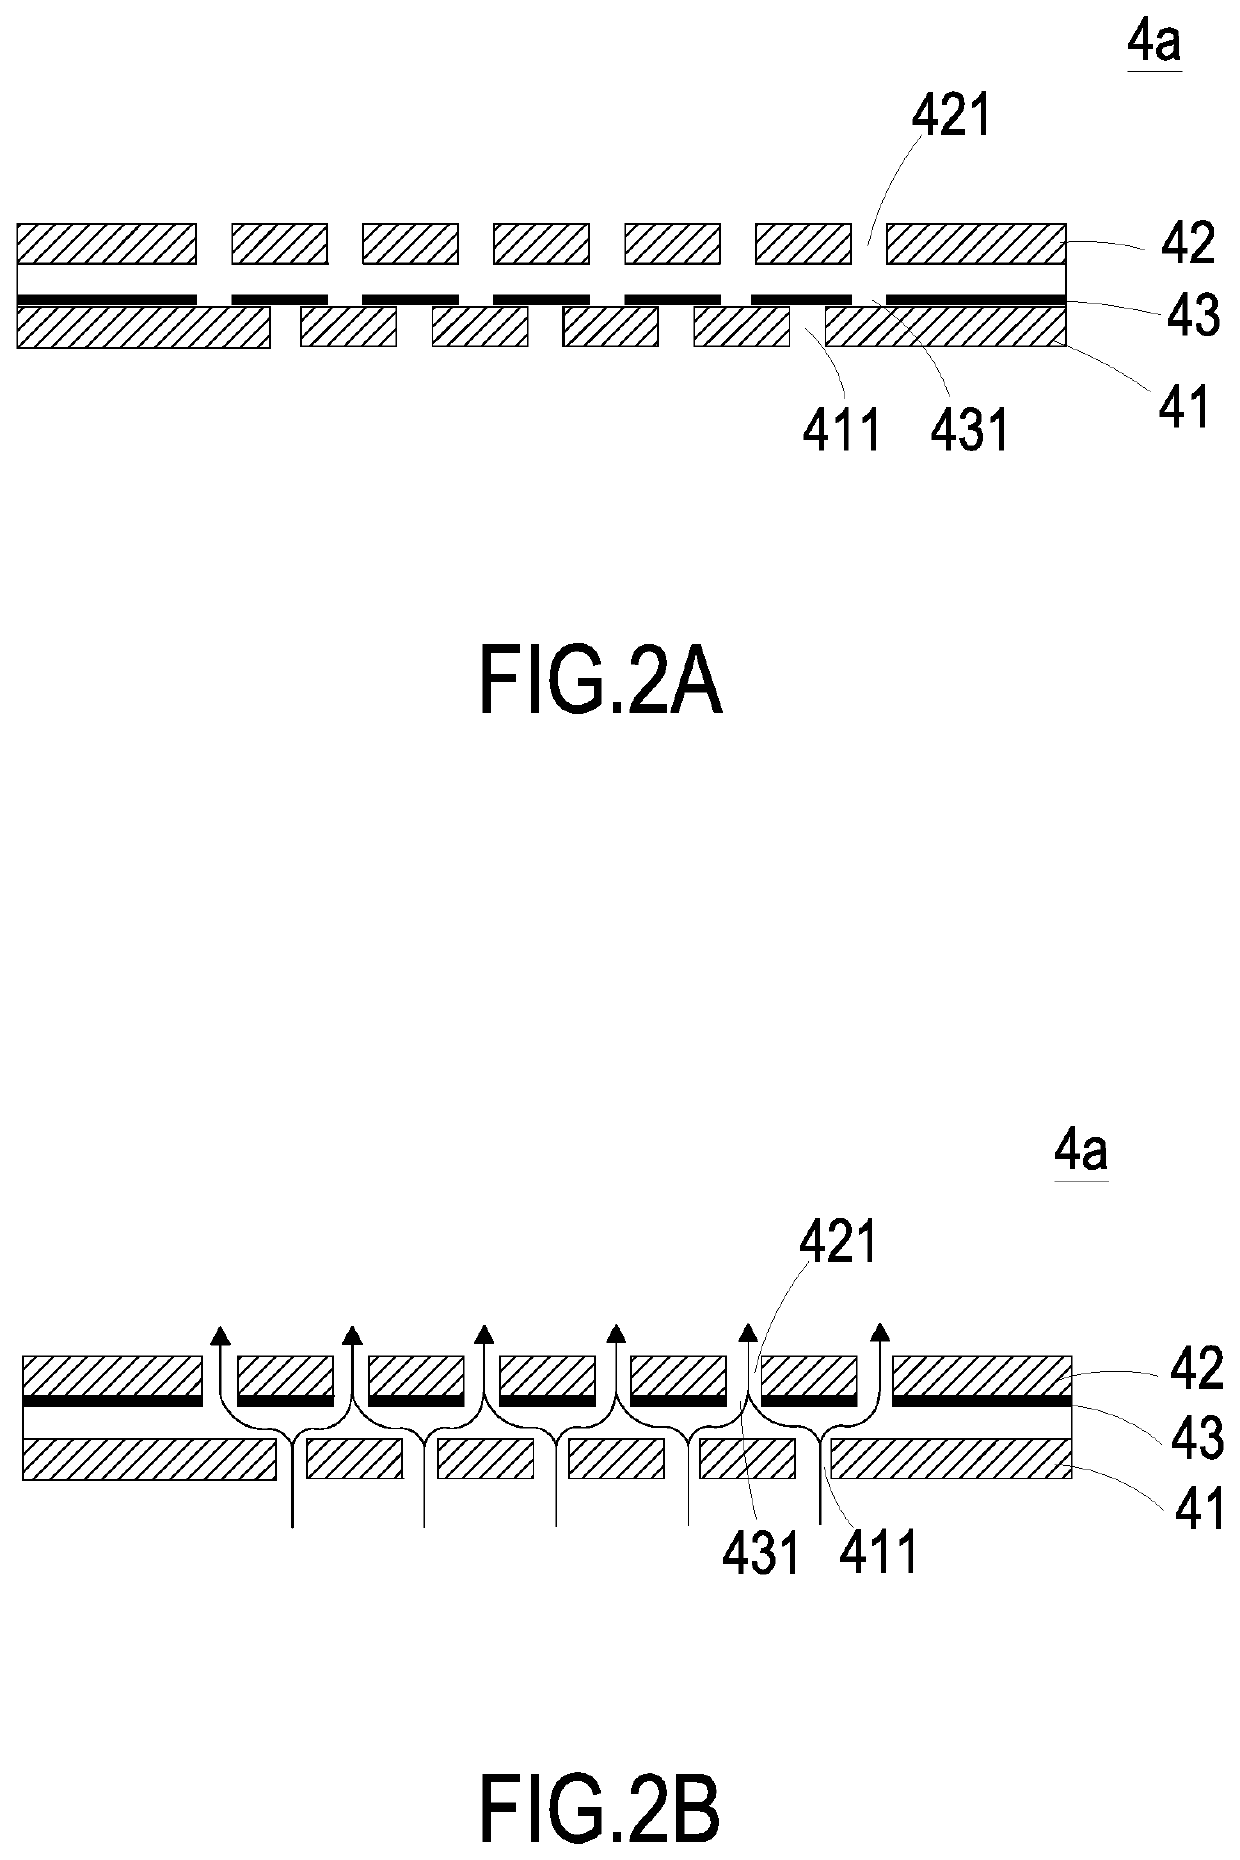 Liquid supplying device for human insulin injection